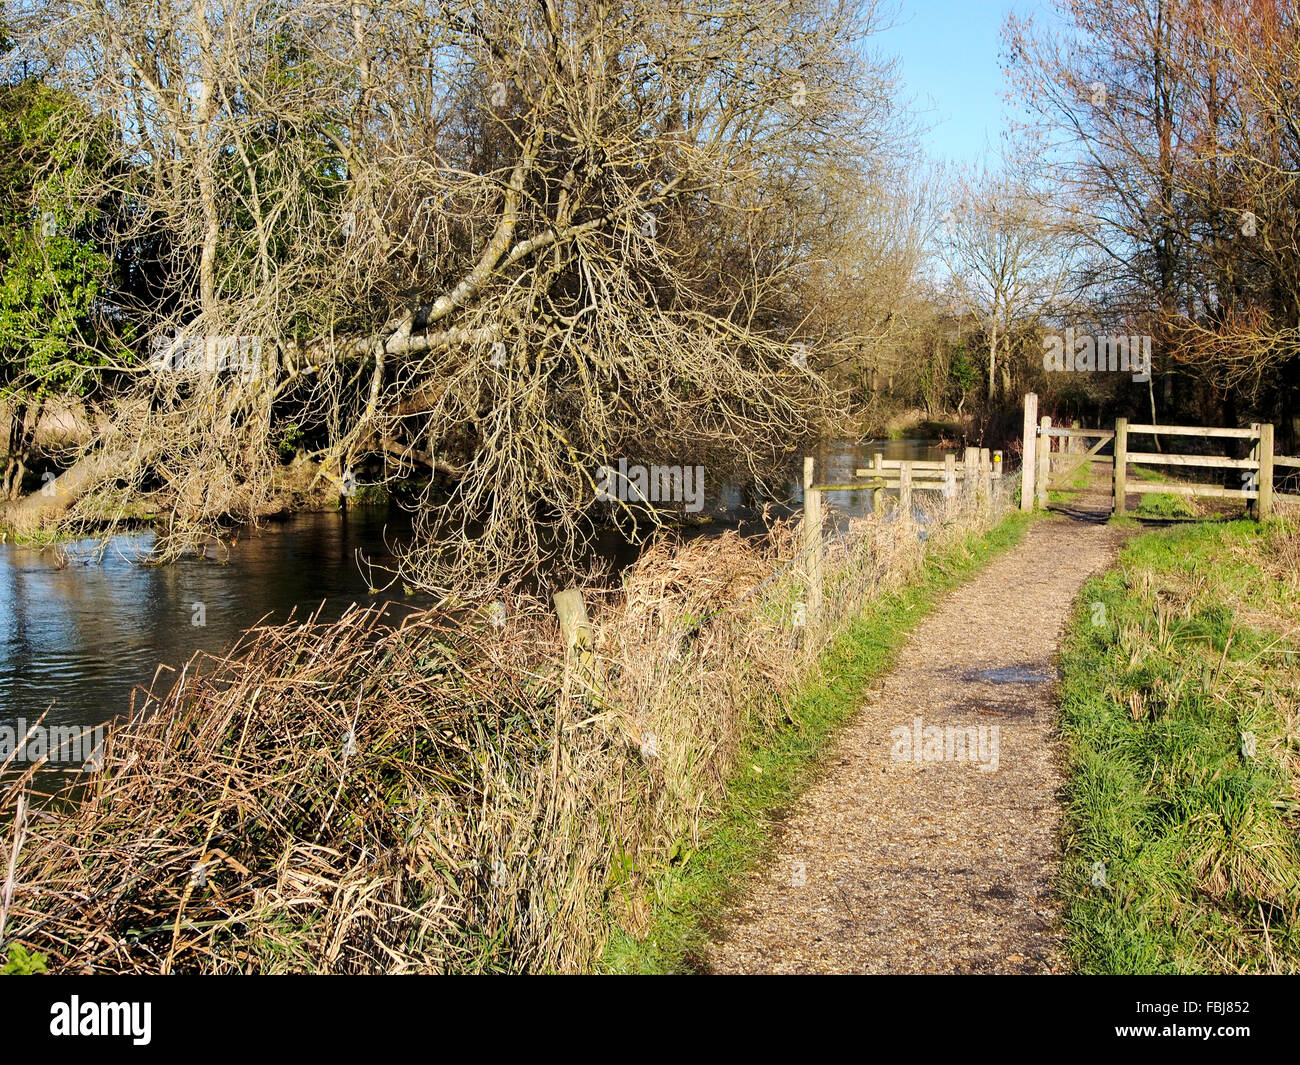 The Itchen Way footpath seen between Hockley and Shawford near Winchester follows the River Itchen and Itchen Navigation. Stock Photo